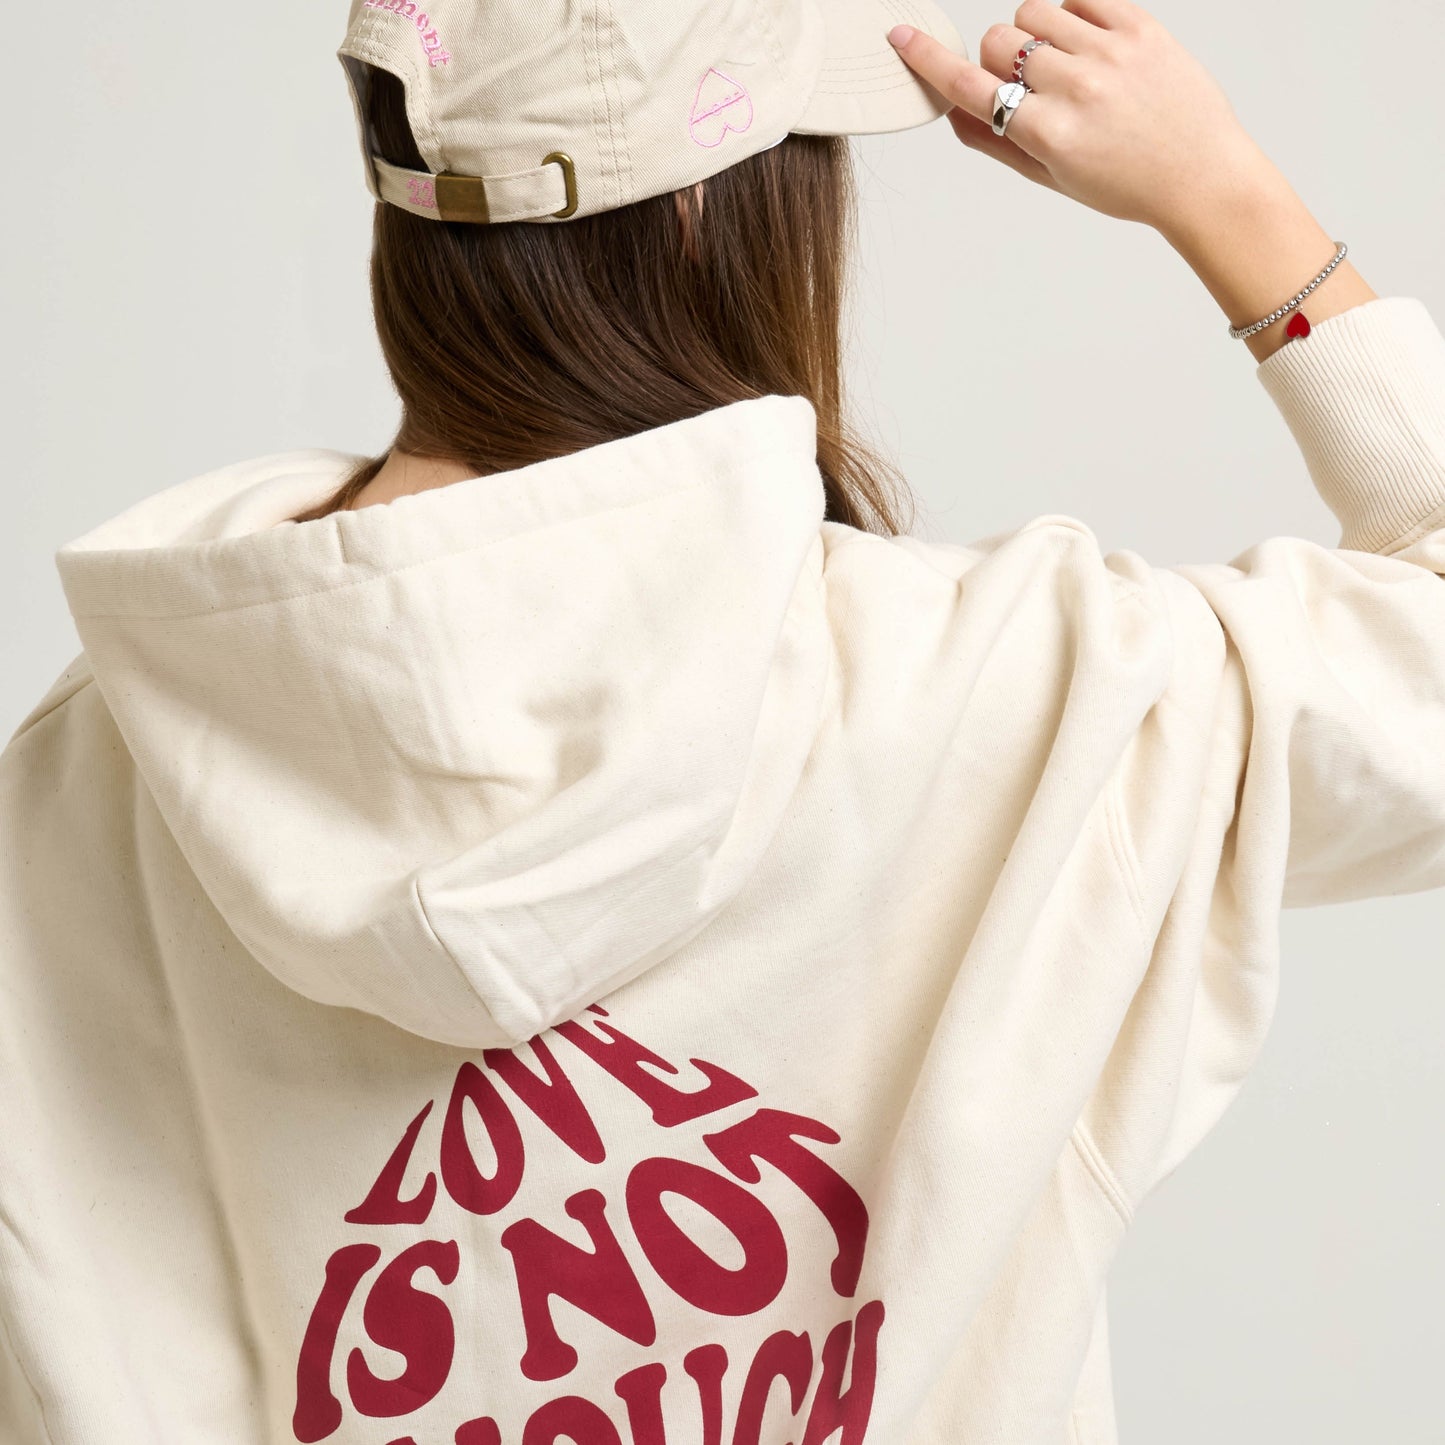 A-MORE Love Is Not Enough - Sudadera